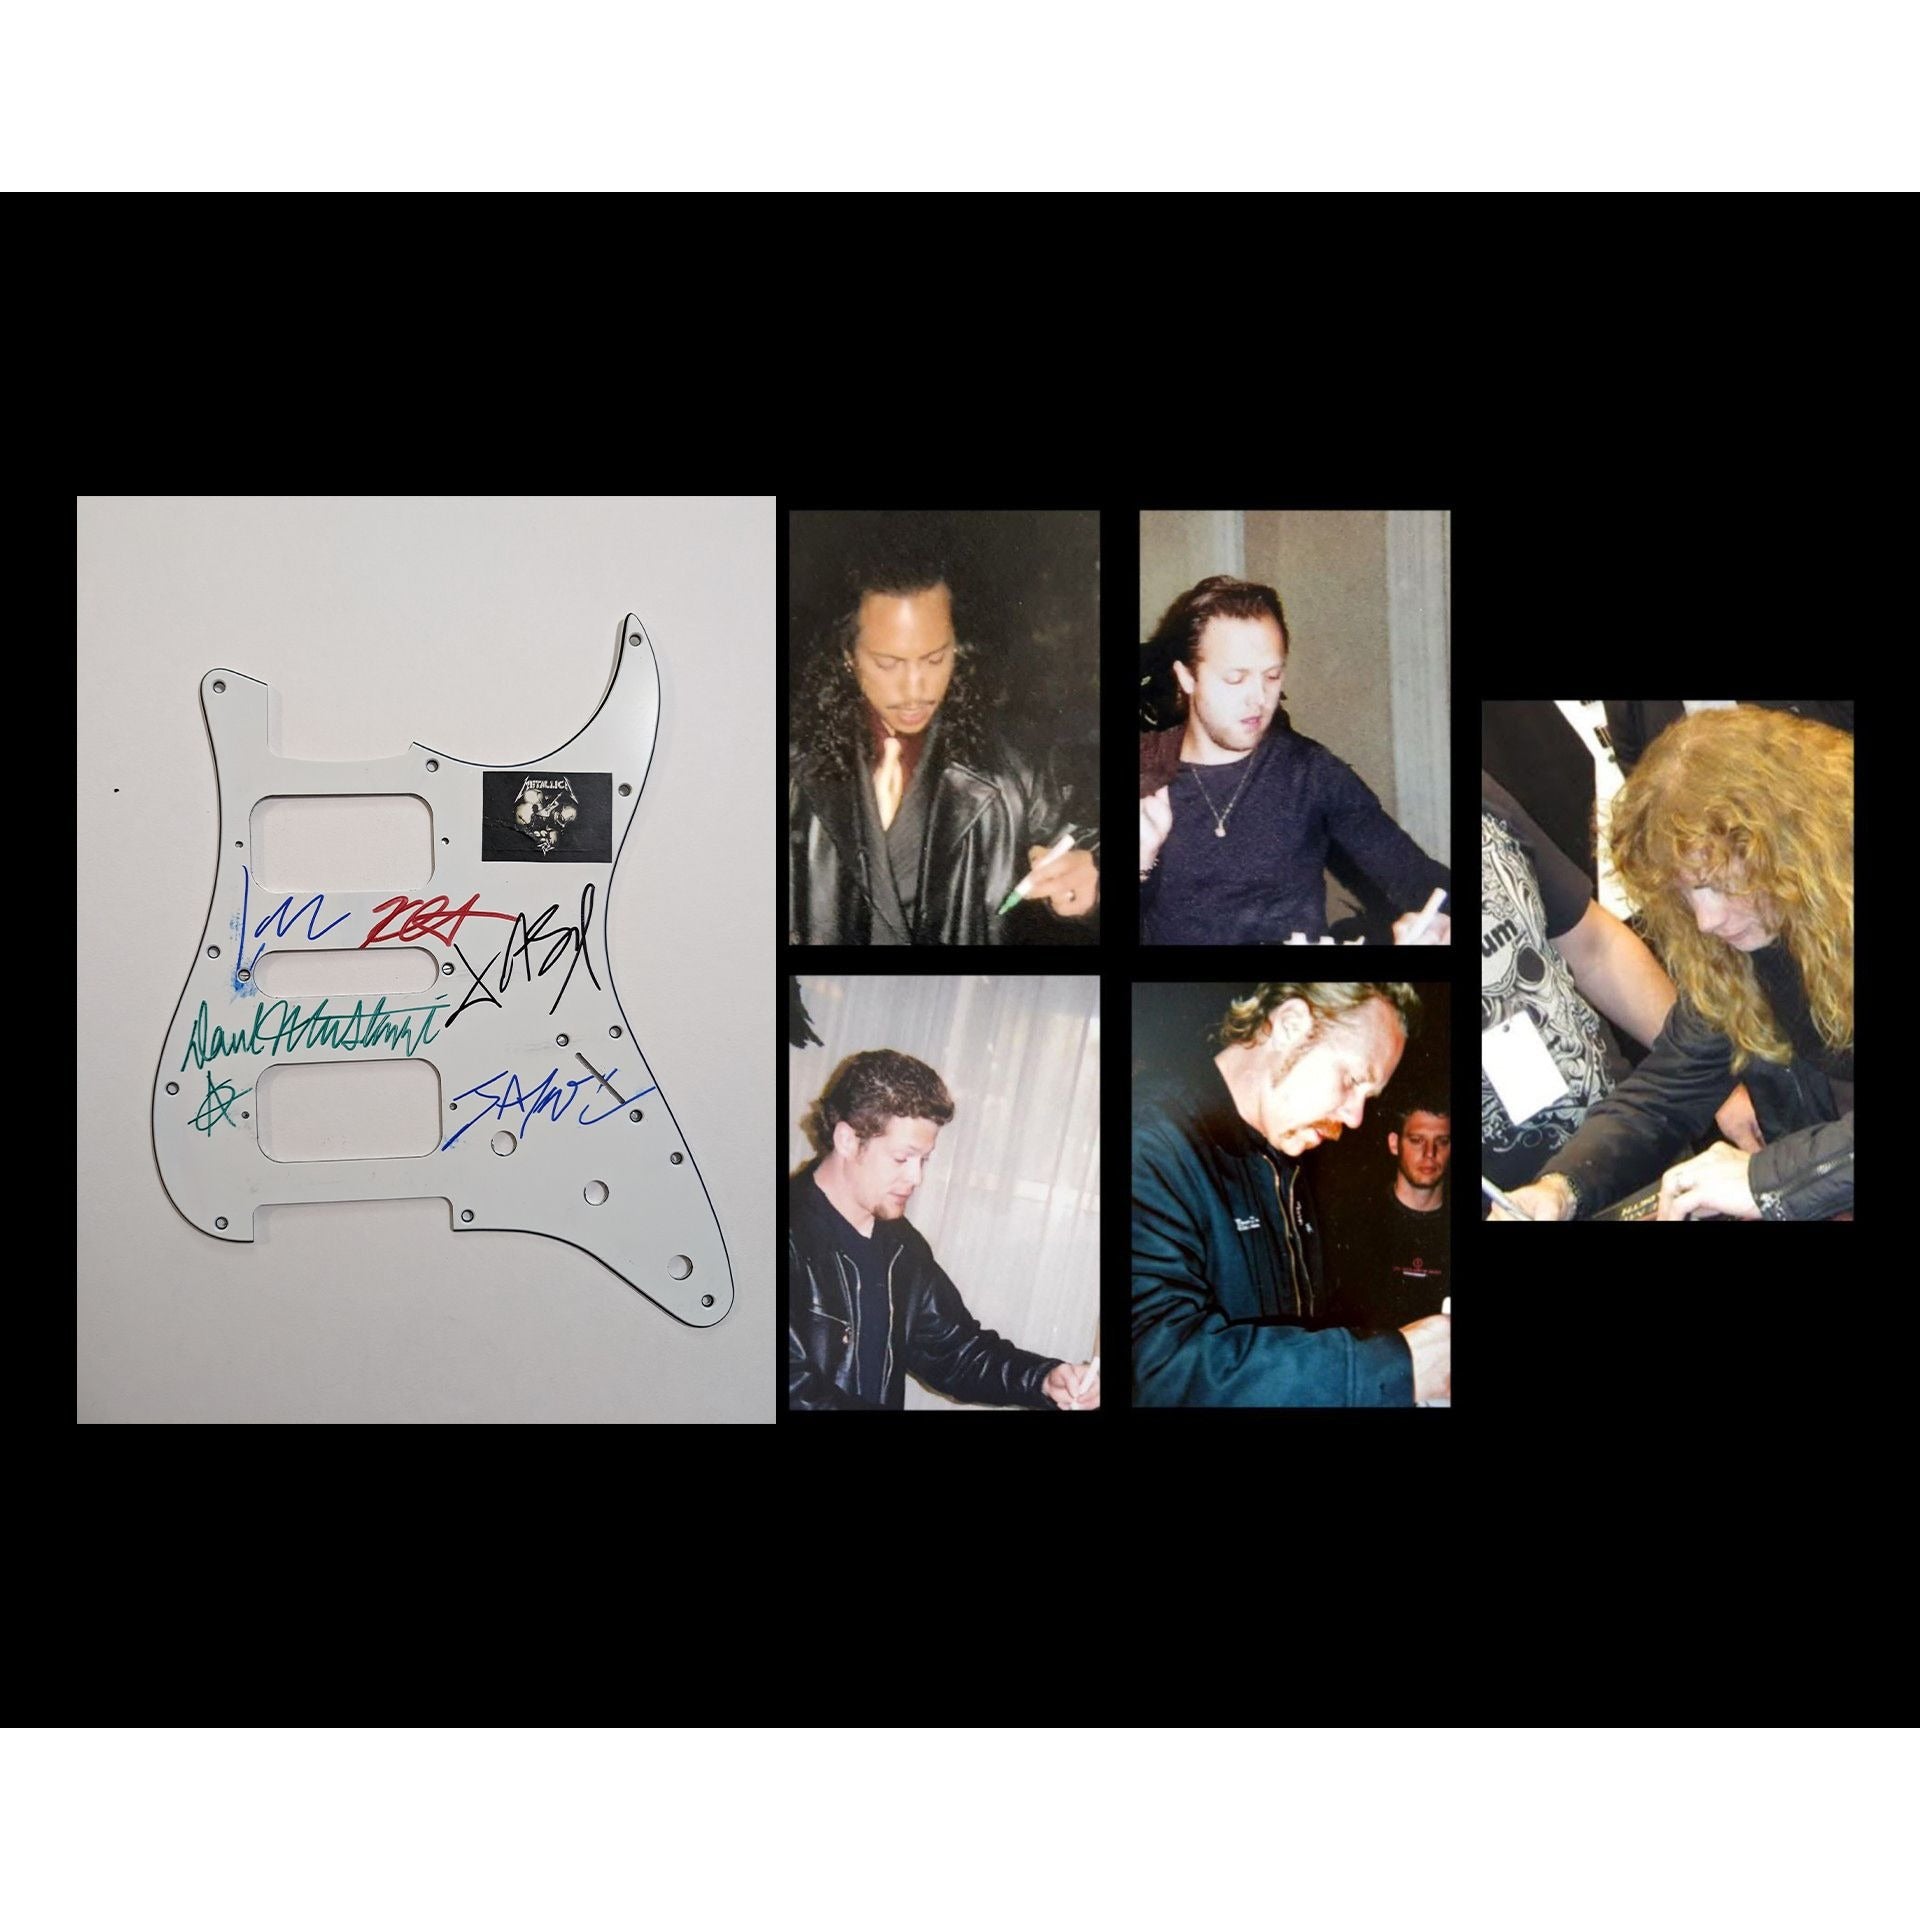 Metallica James Hetfield Kirk Hammett Jason Newsted Dave Mustaine Metallica Fender Stratocaster electric pickguard signed with proof